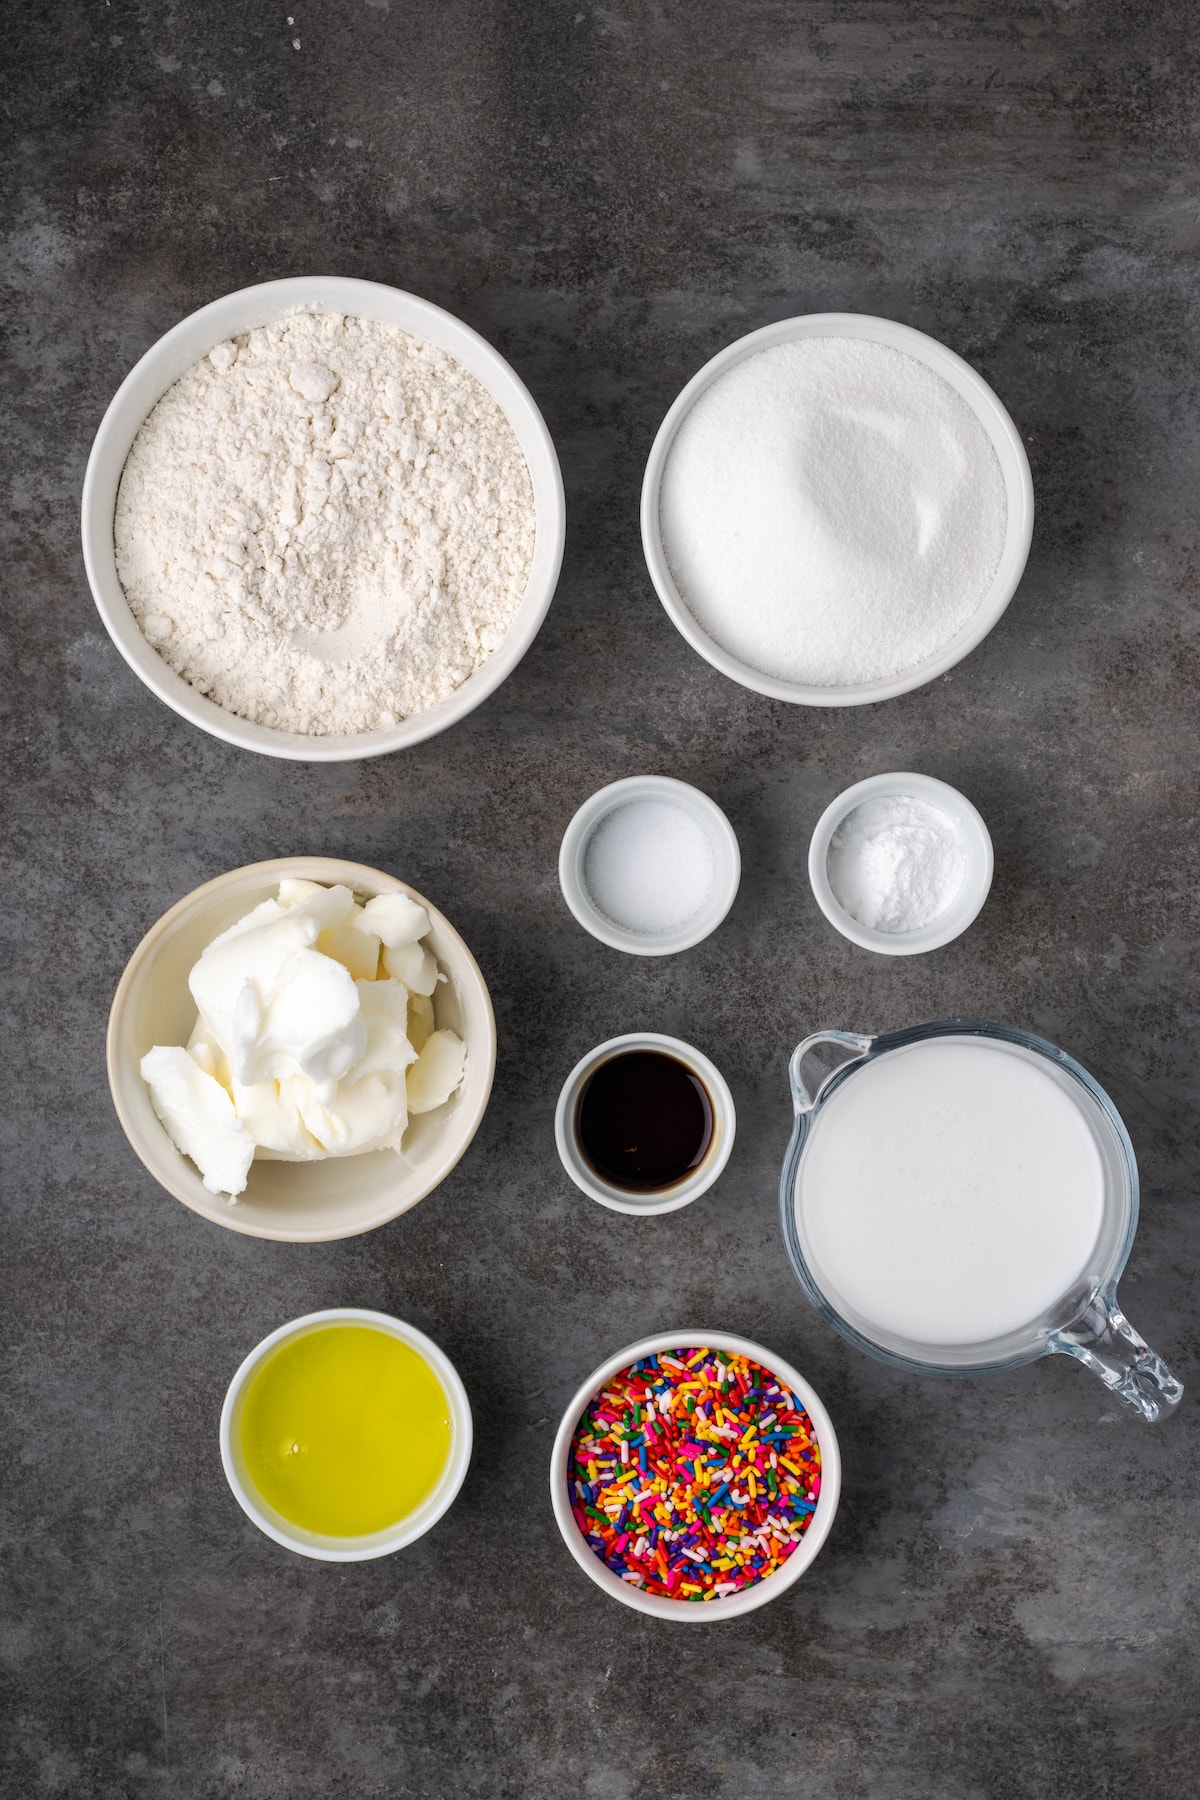 The ingredients for confetti cake.